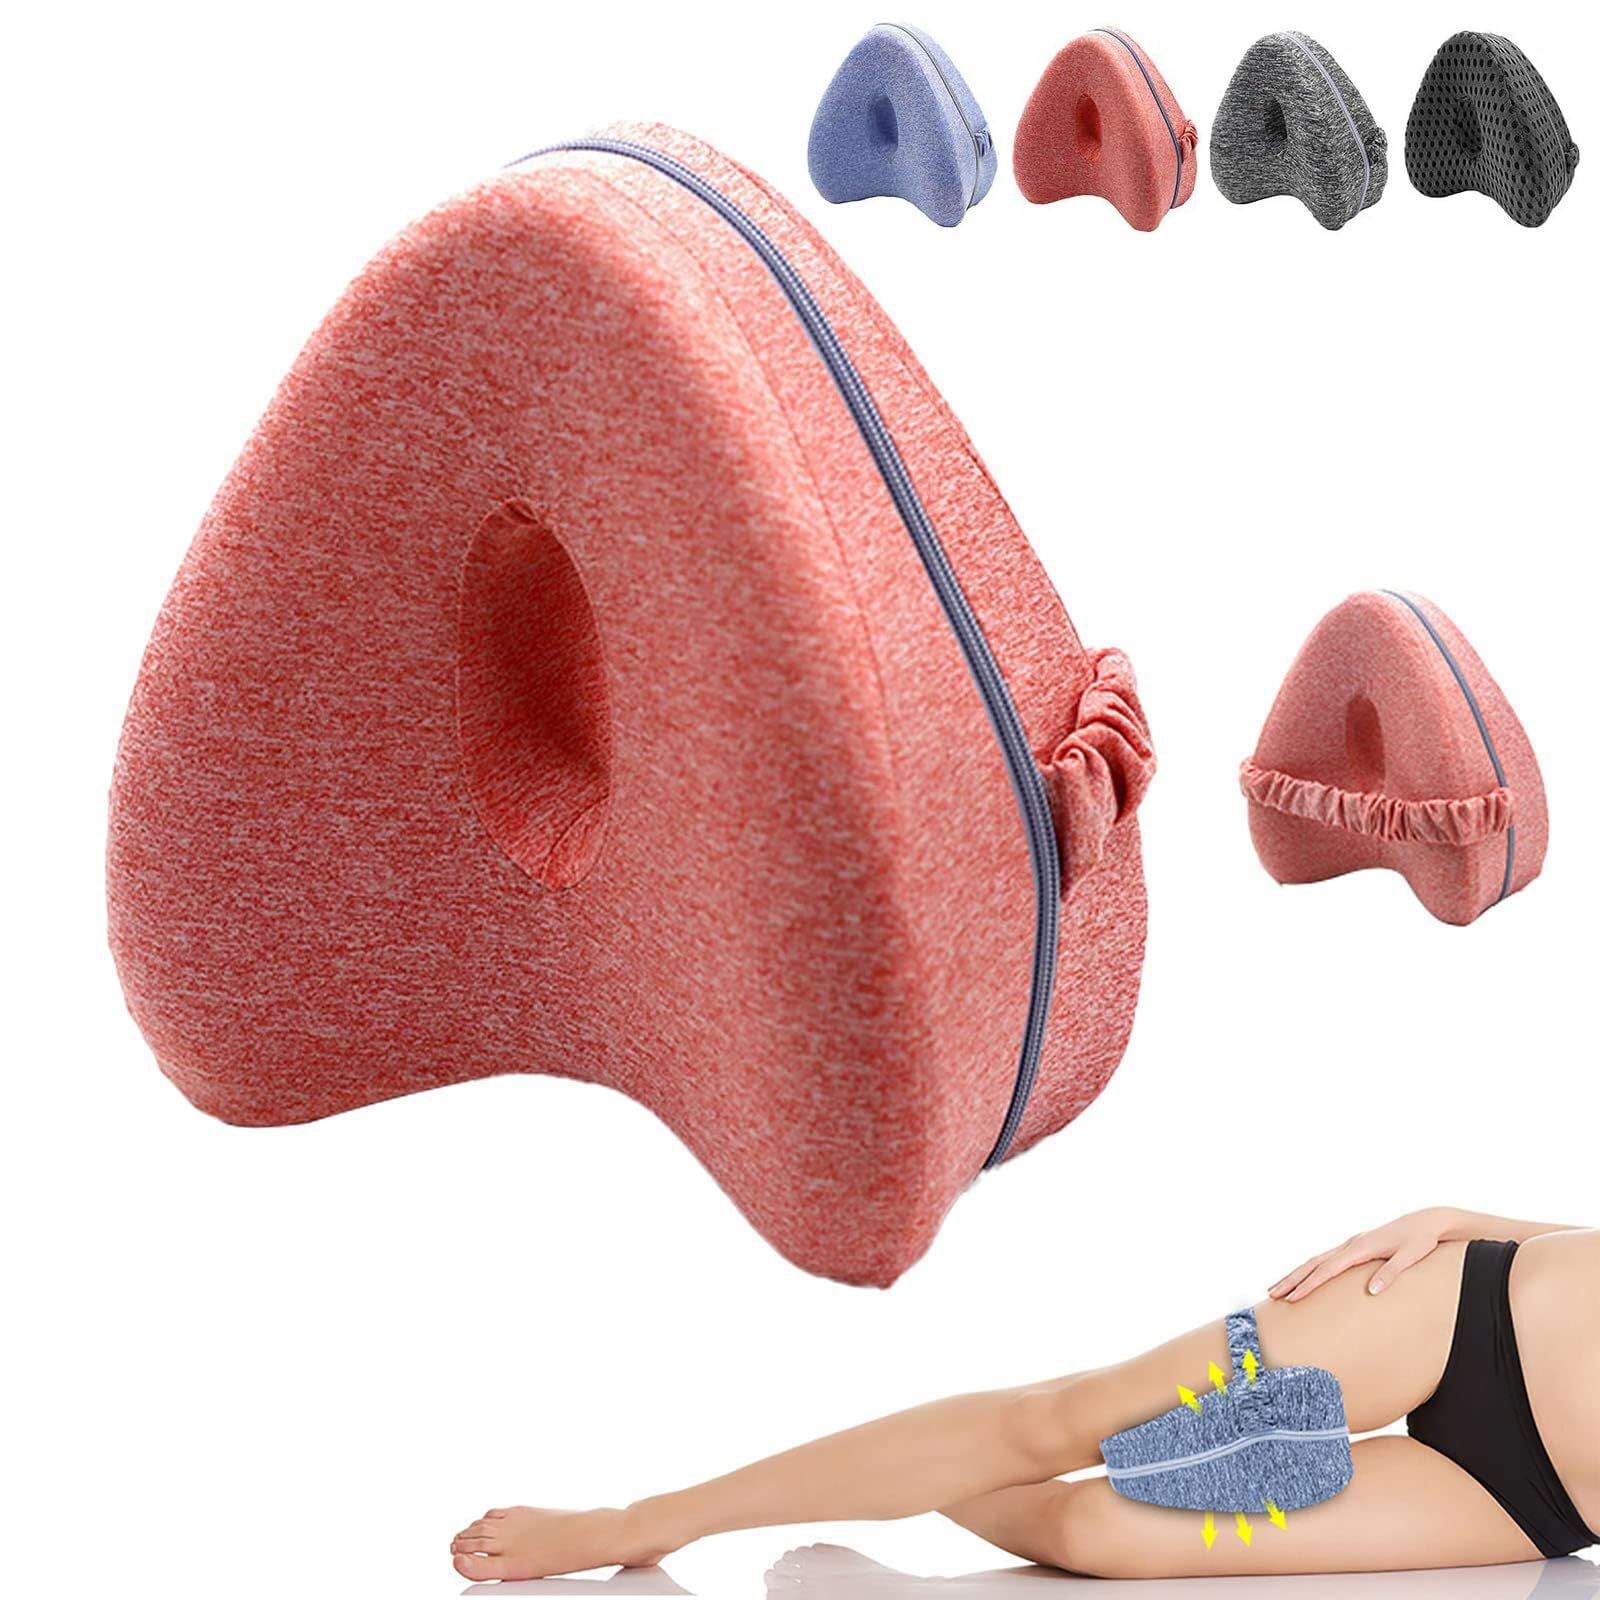  KCRPM Smooth Spine Alignment Pillow, Smooth Spine